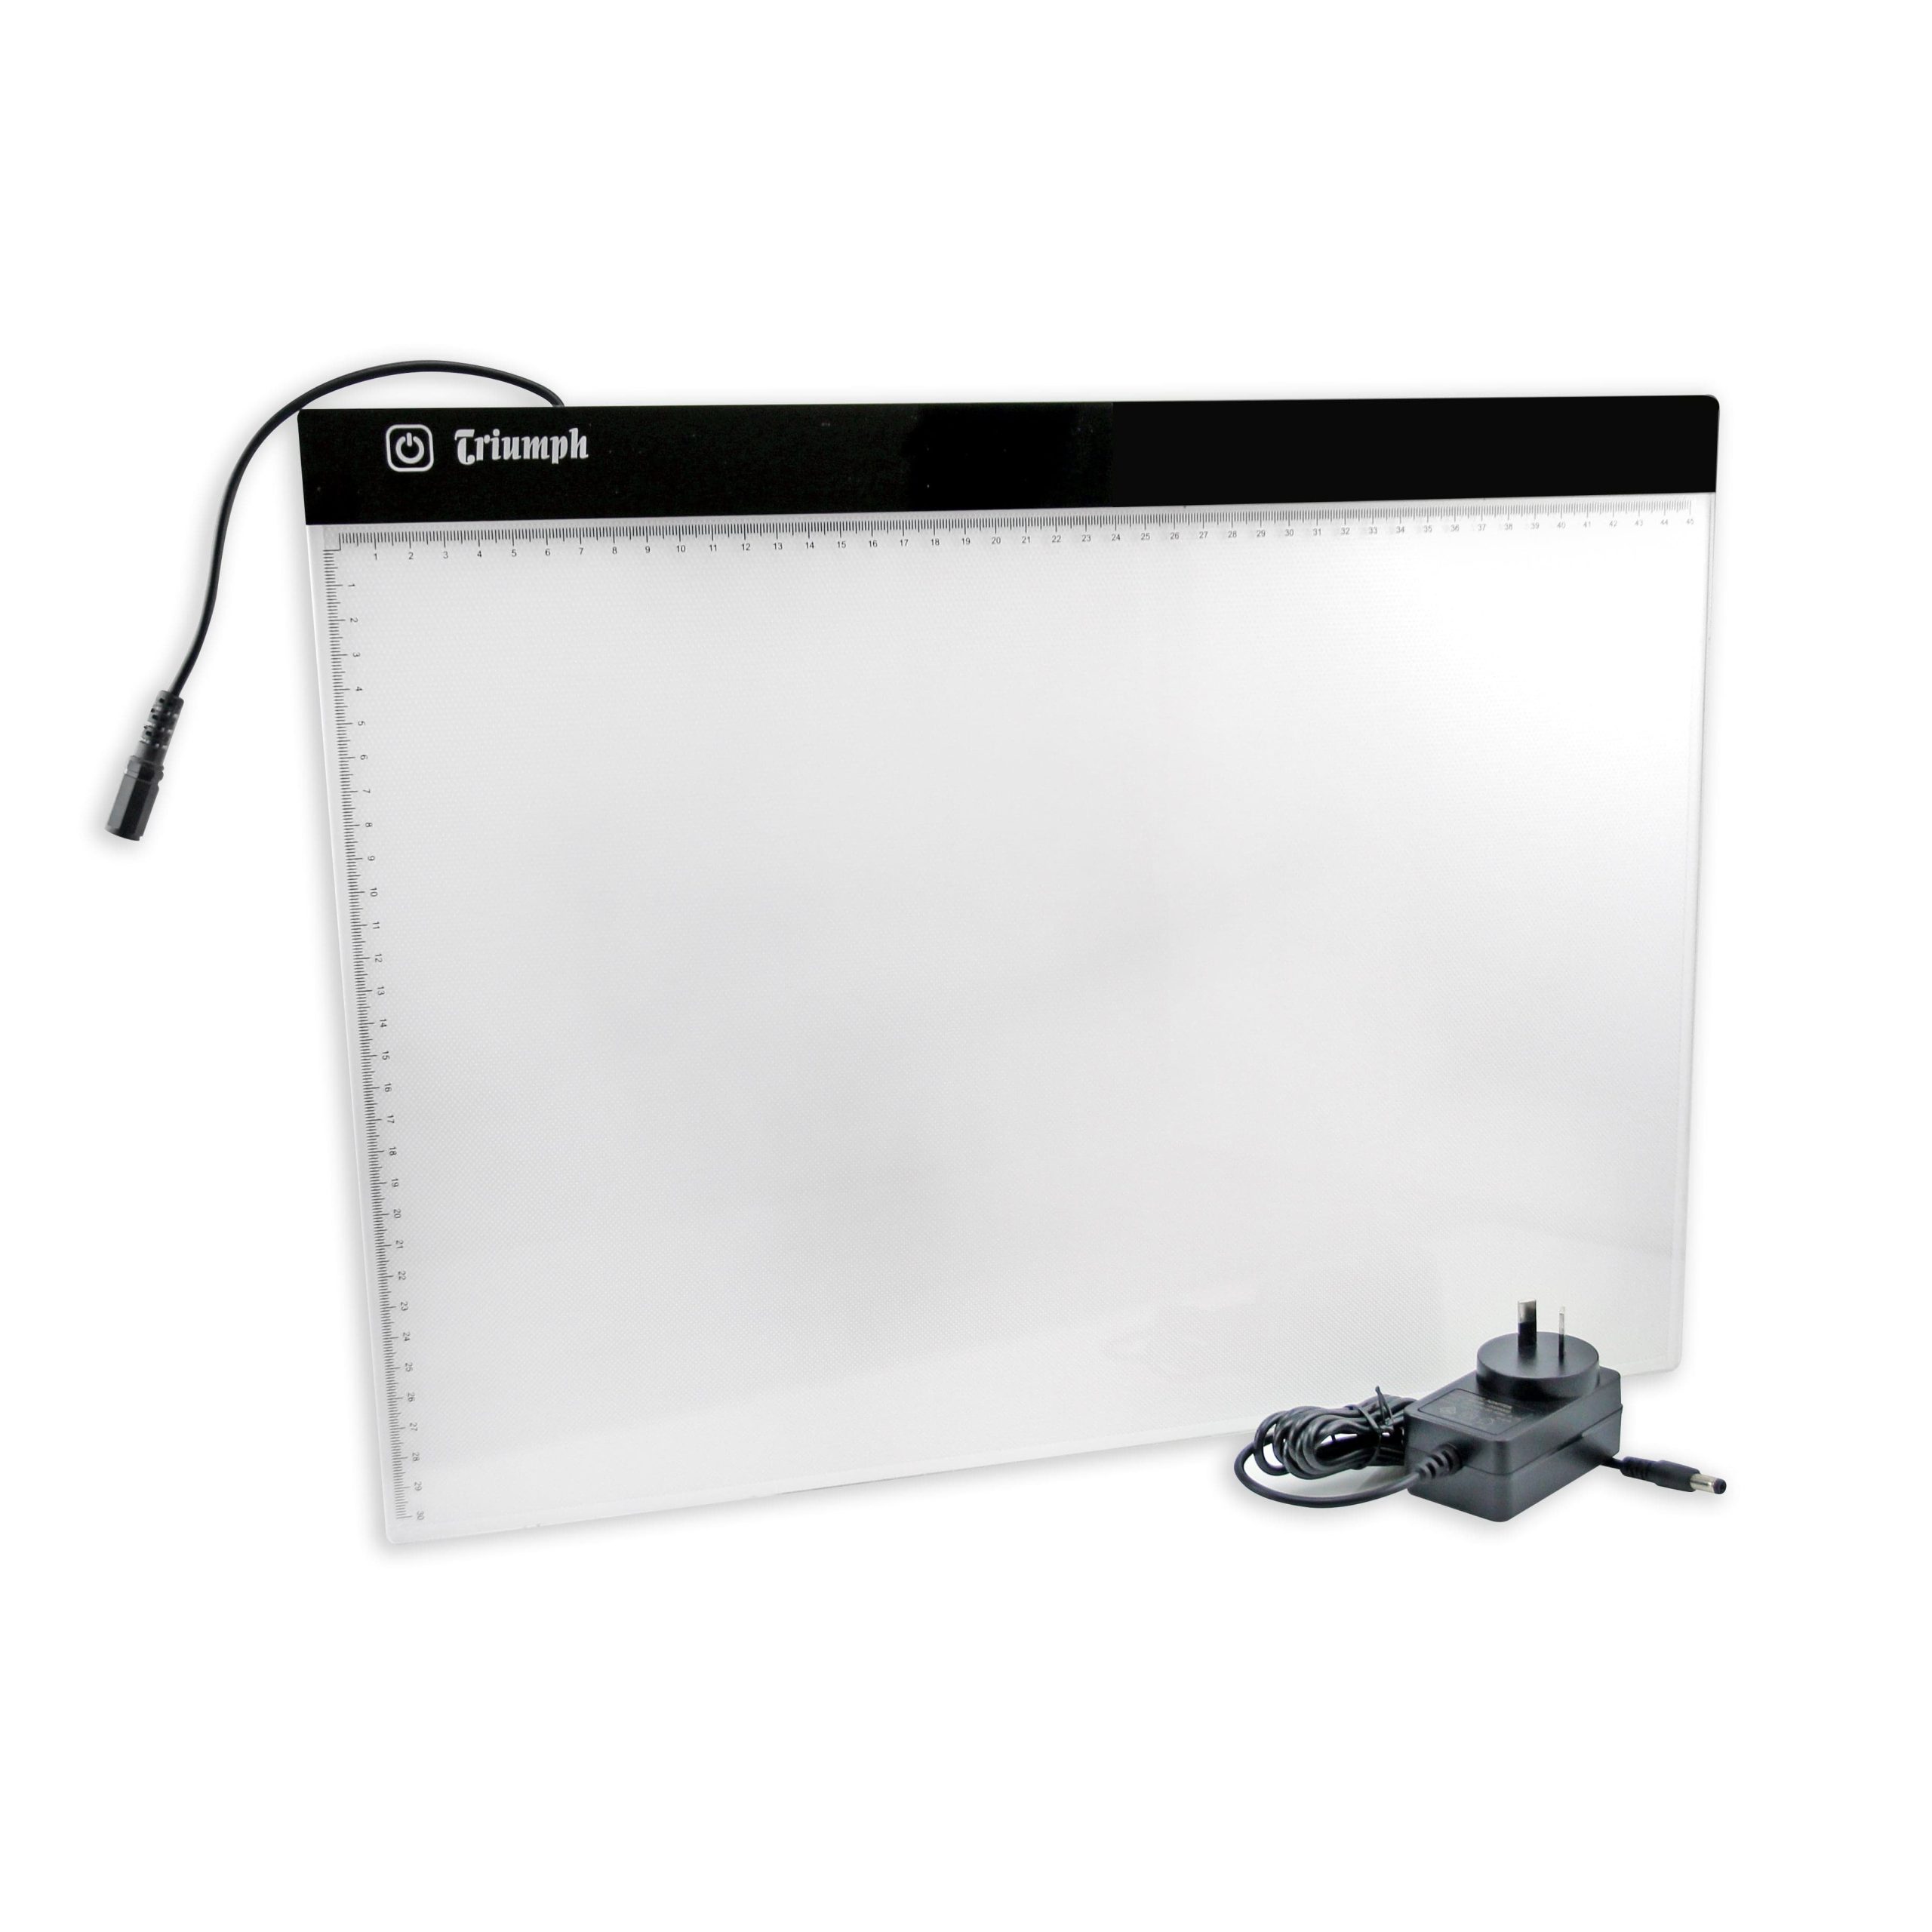 You can find the best bargains at TRIUMPH A3 Super Slim LED Light